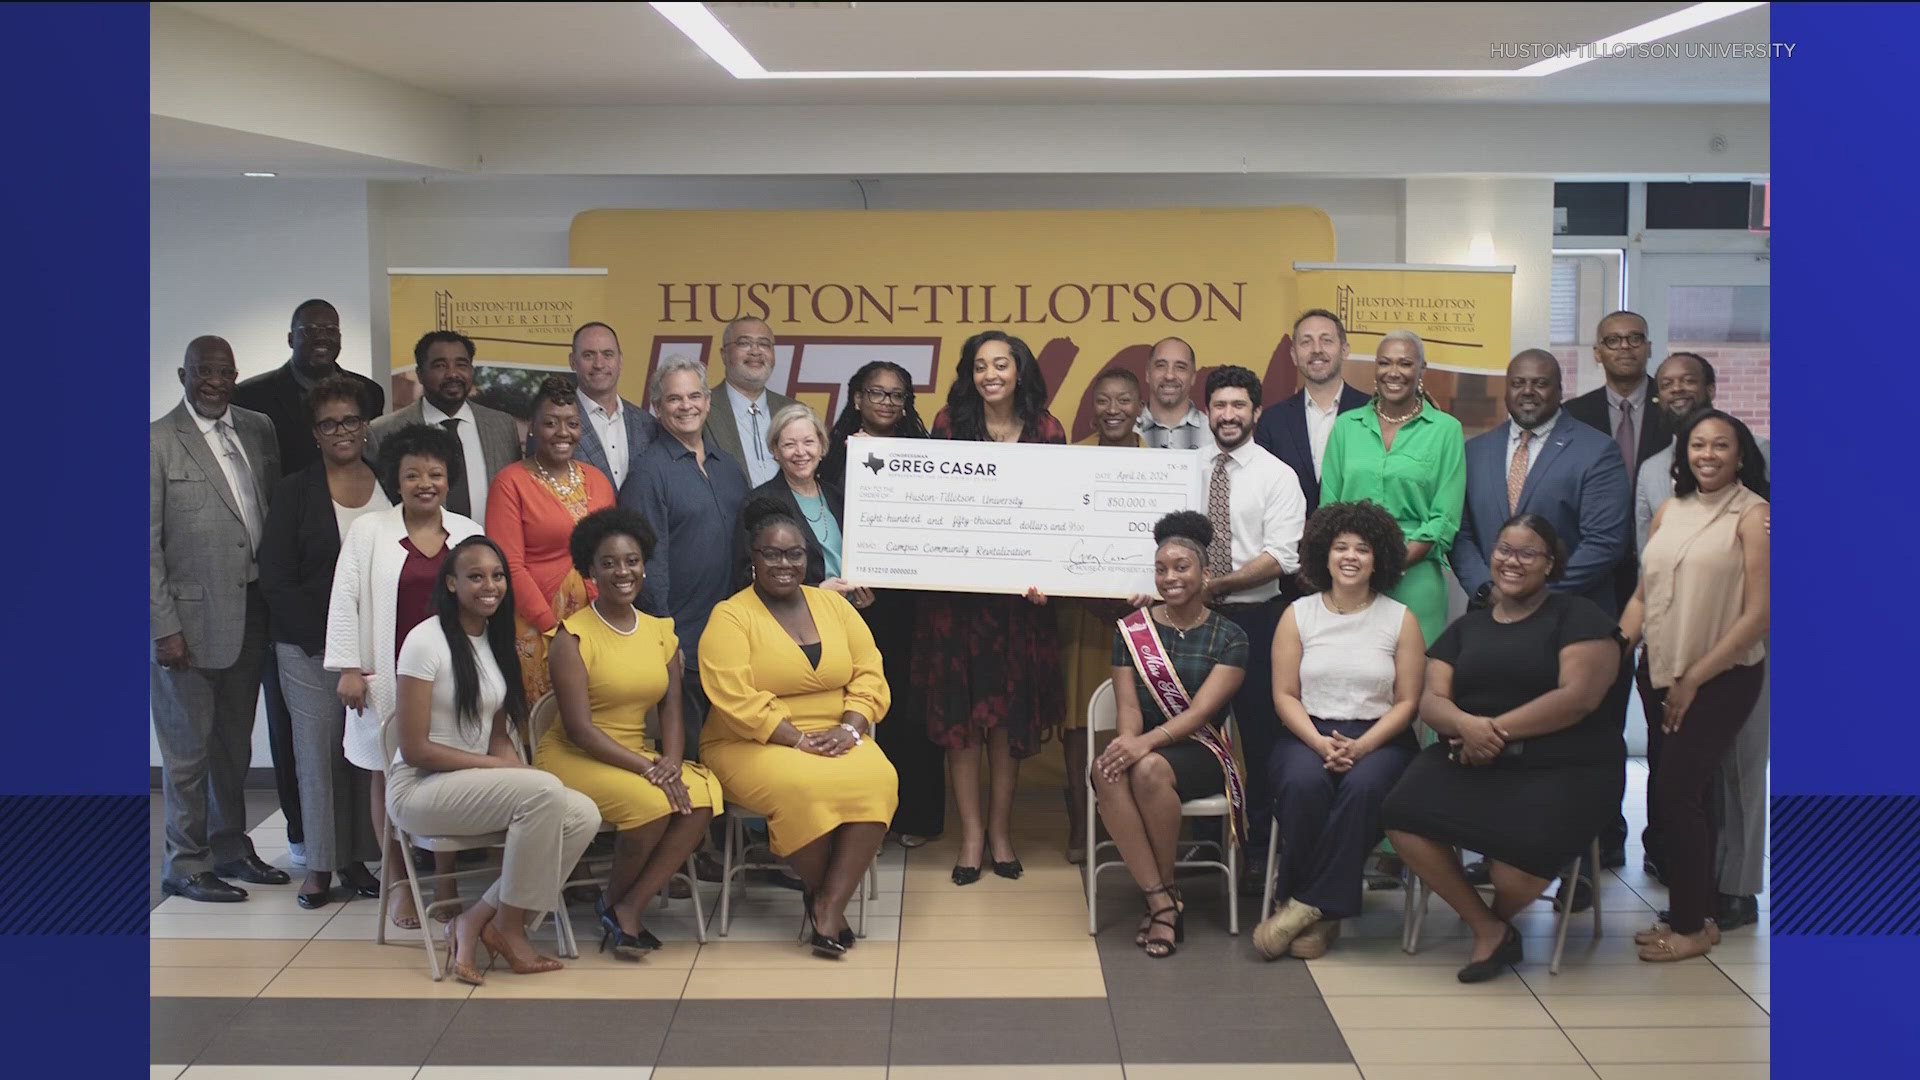 Huston-Tillotson University received funding from the federal government to update its campus.